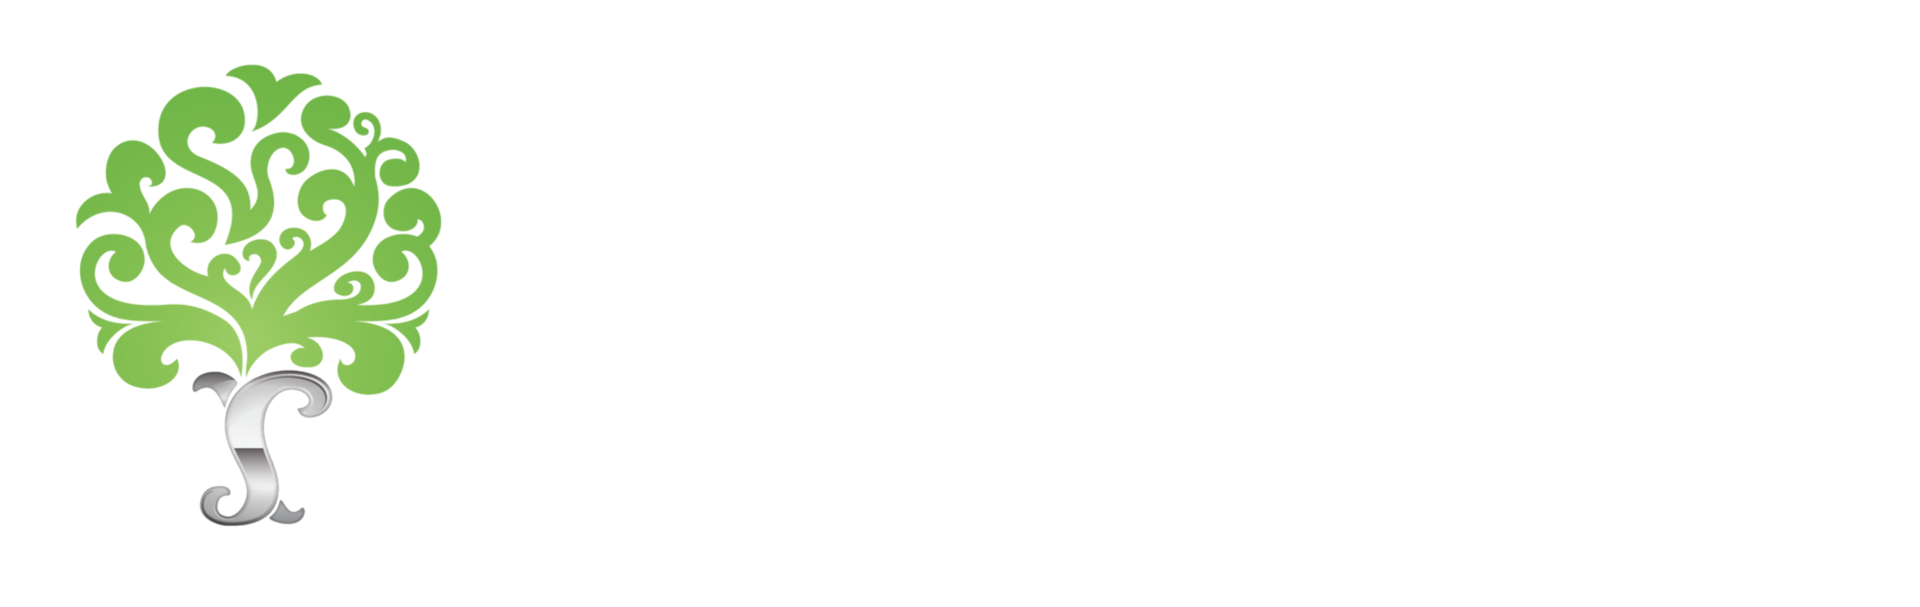 Modern Dermatology of KY & Cosmetic Specialists